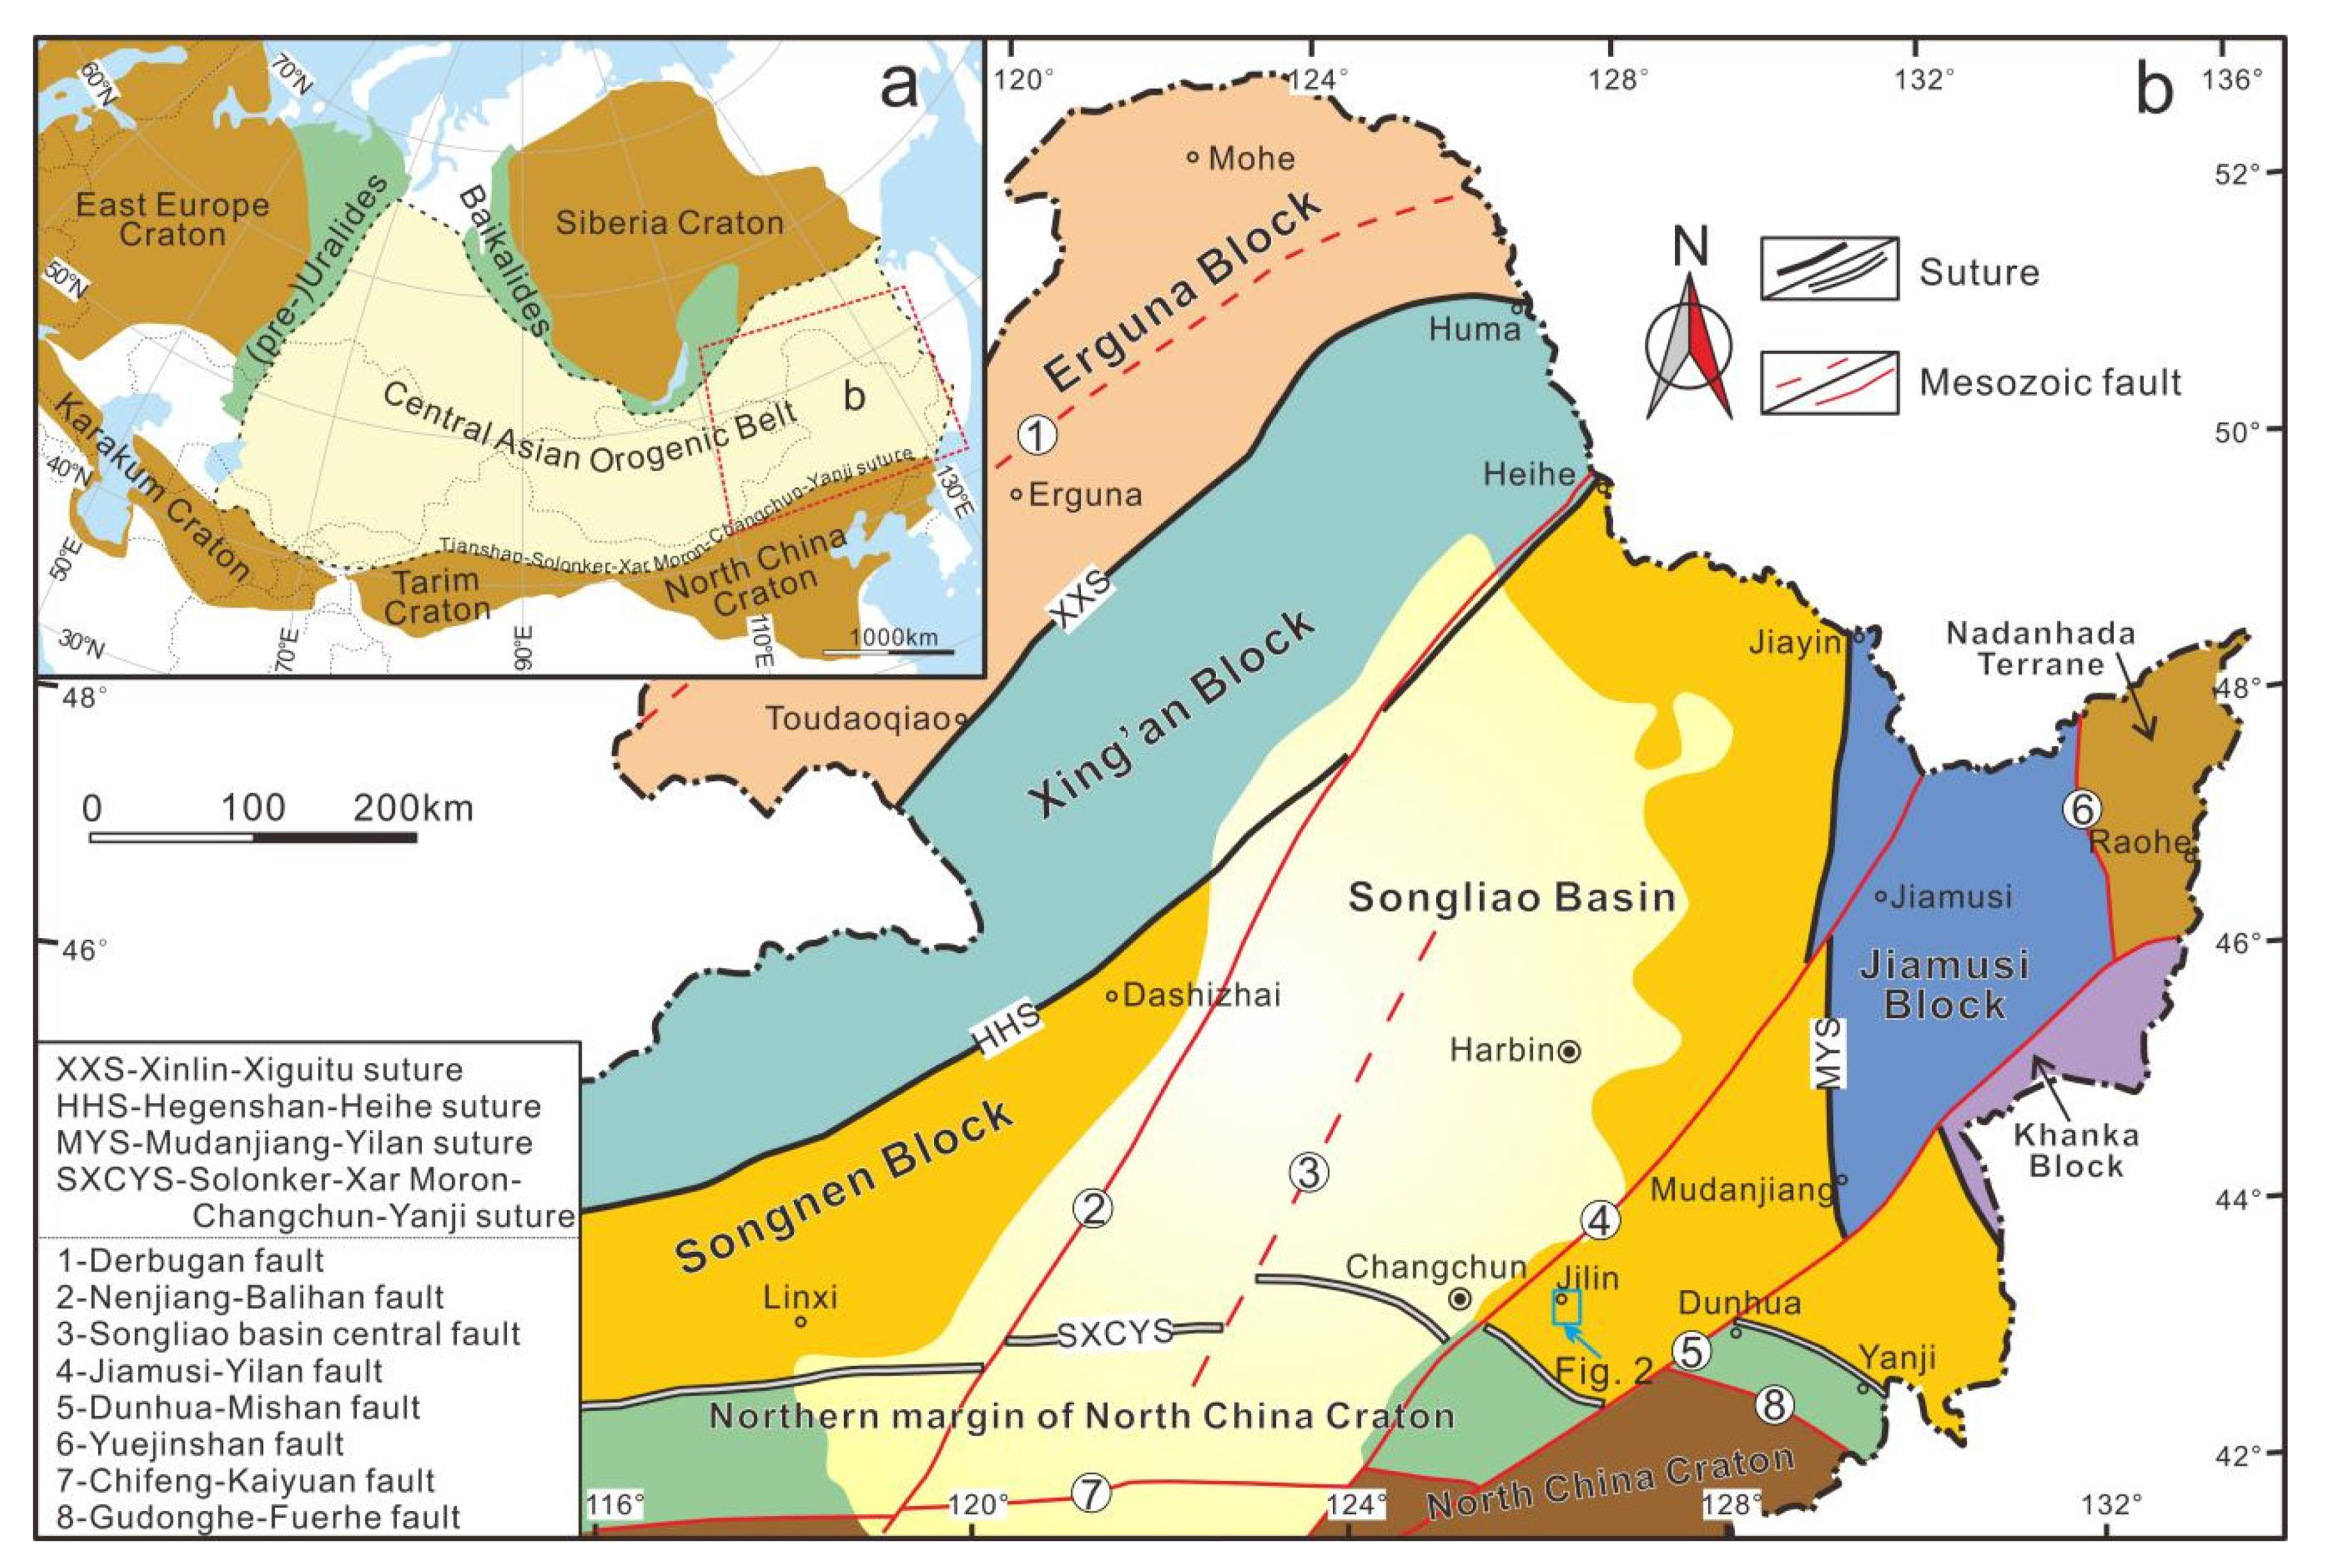 The Central Asian Orogenic Belt (CAOB) during Late Devonian: new